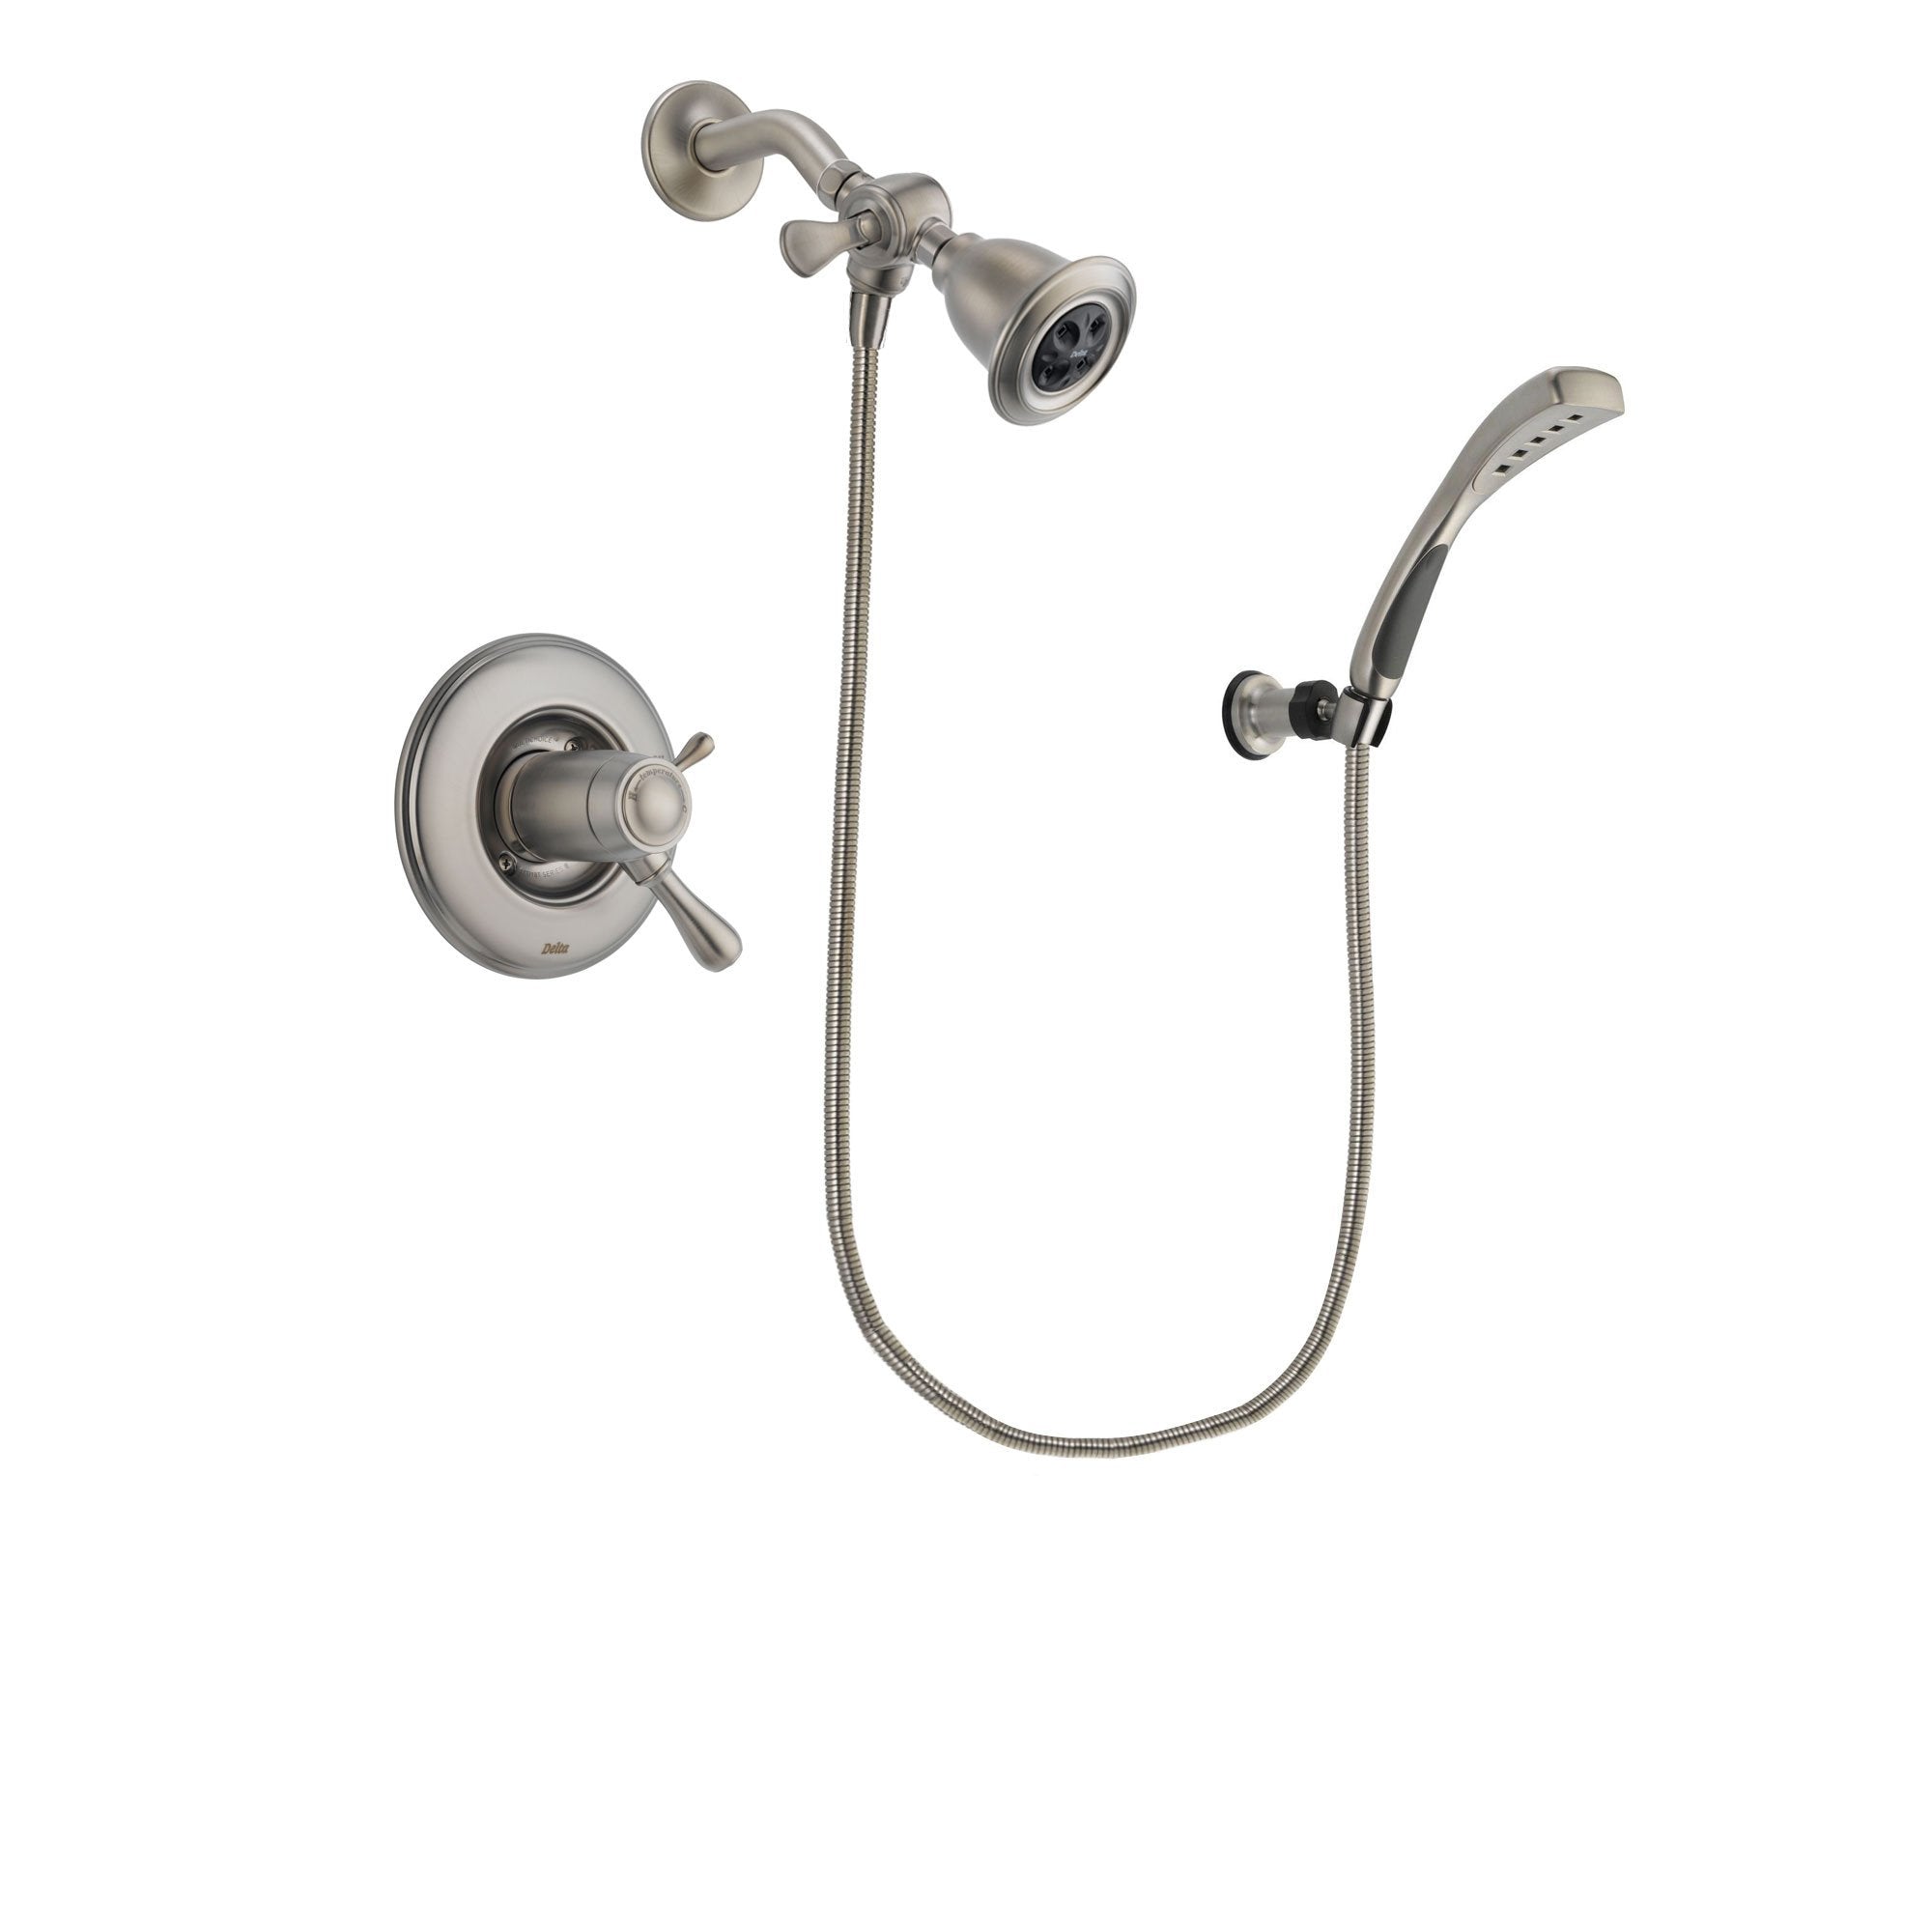 Delta Leland Stainless Steel Finish Thermostatic Shower Faucet System Package with Water Efficient Showerhead and Wall Mounted Handshower Includes Rough-in Valve DSP1824V